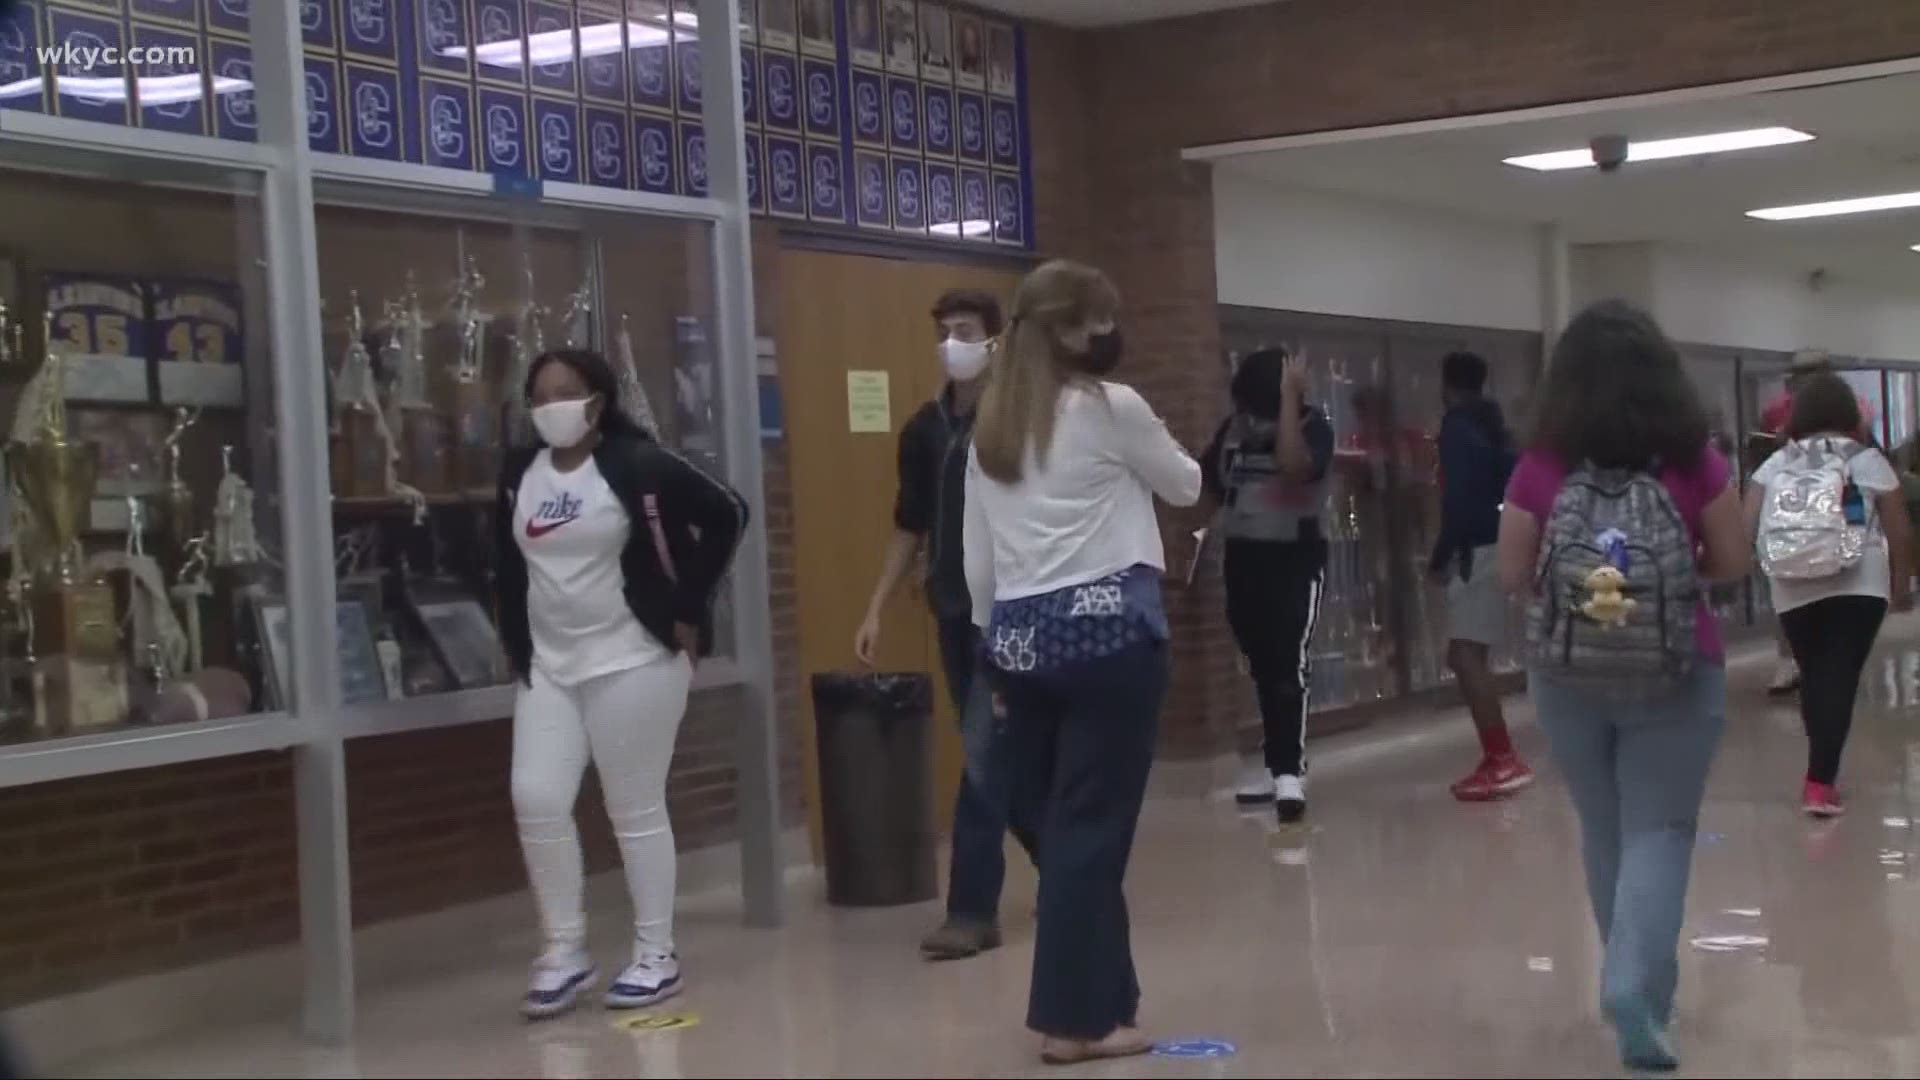 Ohio Health Officials are not mandating masks to be worn in schools.